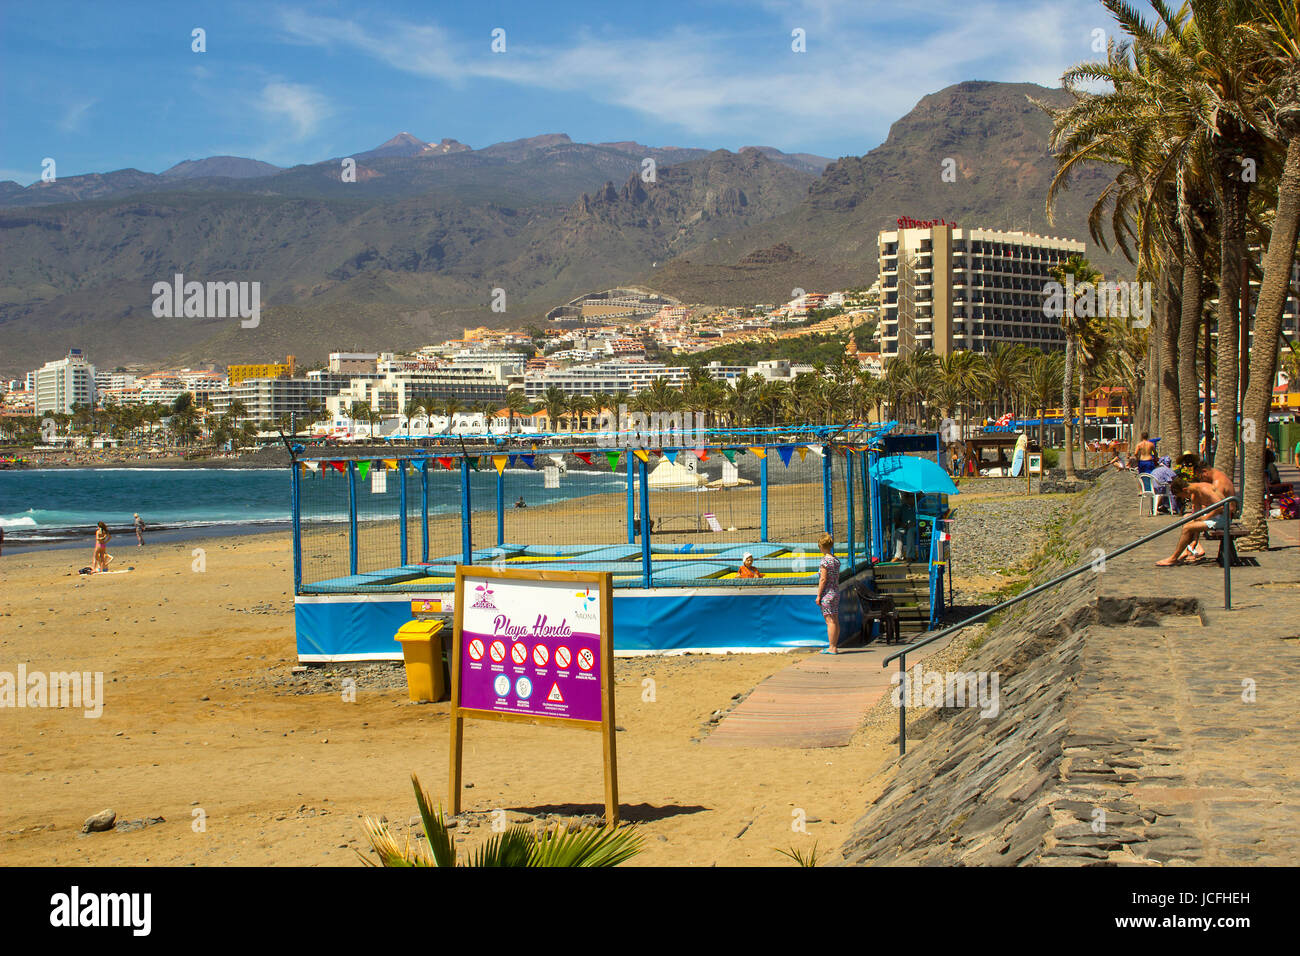 The sandy bay at Playa Las Americas in Teneriffe in the Spanish Canary islands on a hot sunny day Stock Photo